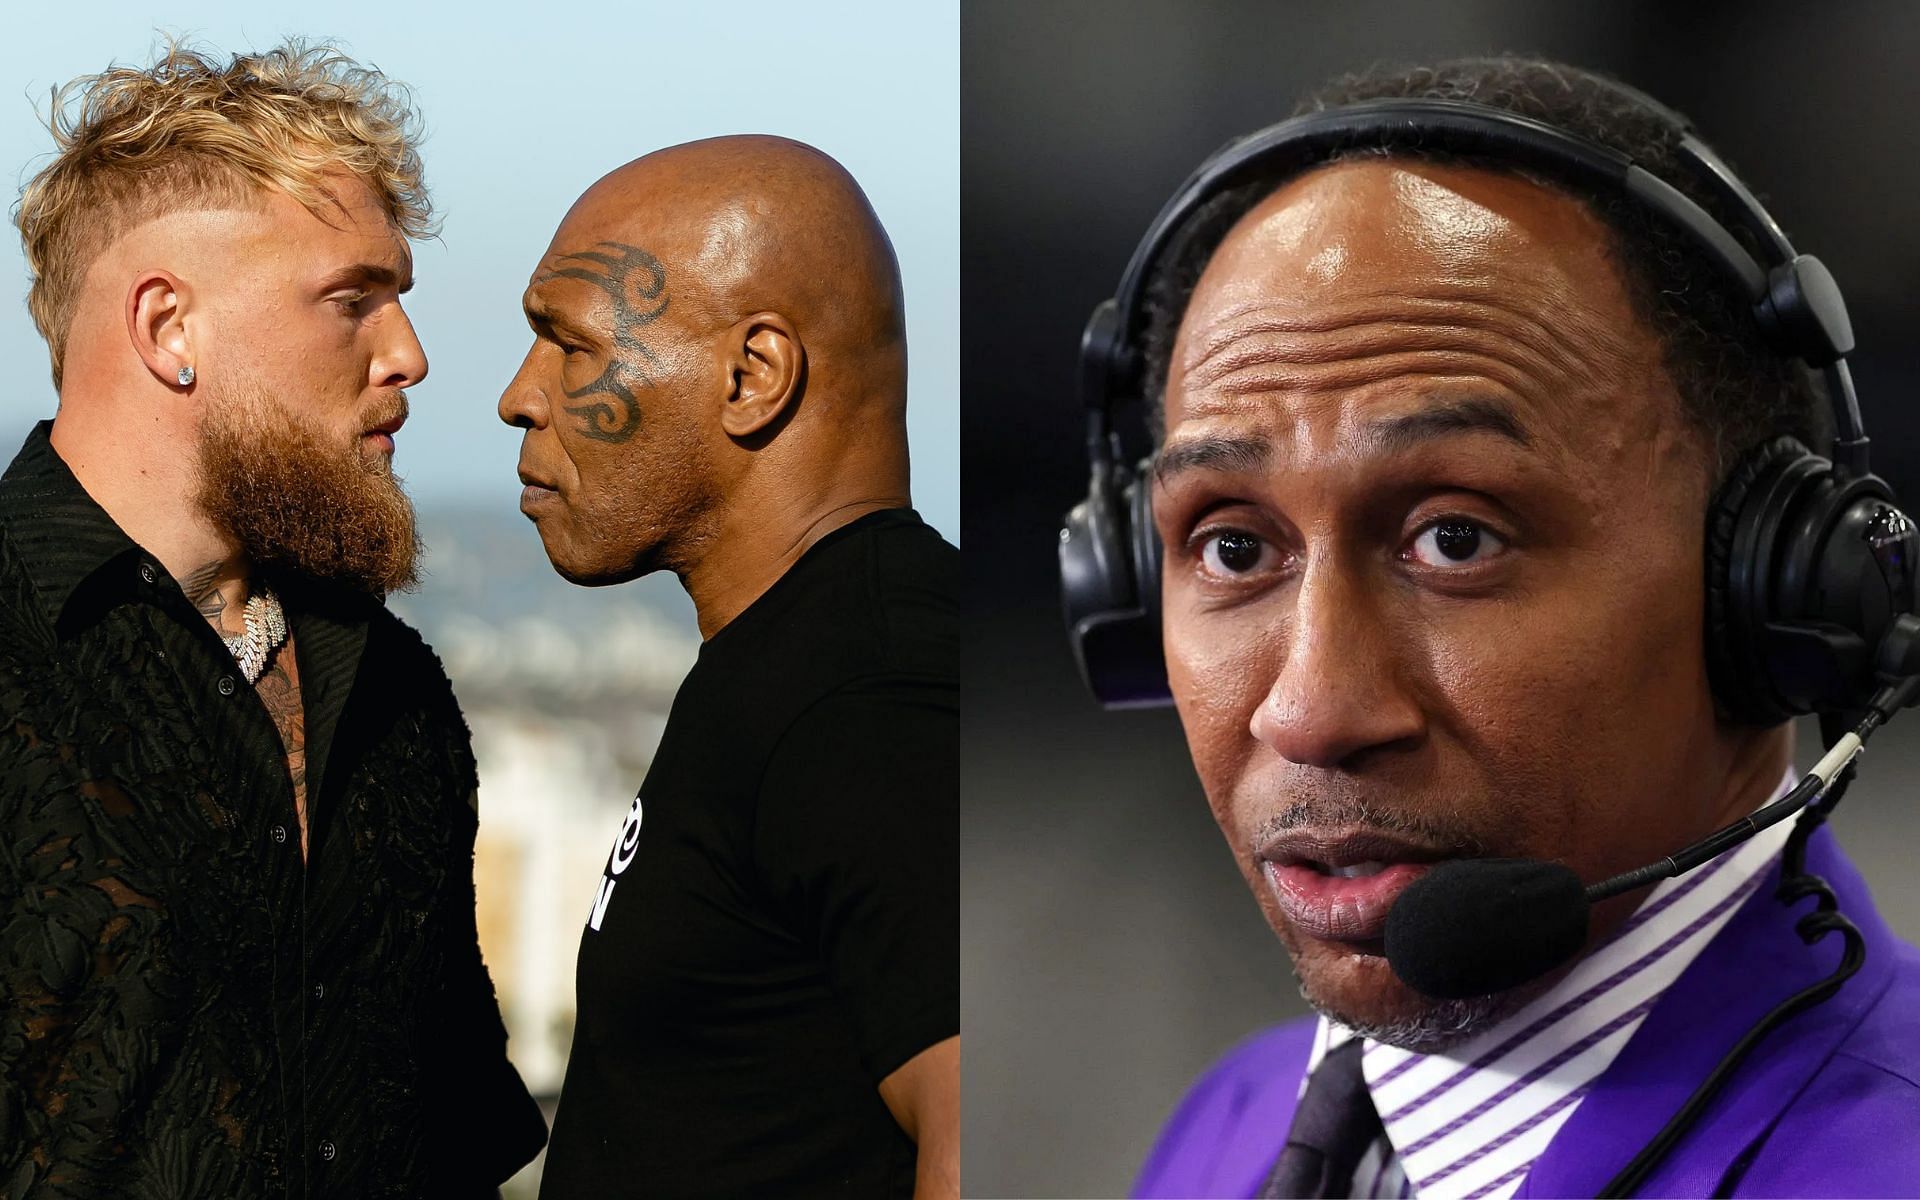 Stephen A. Smith &quot;disgusted&quot; by Jake Paul for decision to box 57-year-old Mike Tyson despite repeated assurances of taking the sport &quot;serious&quot; [Image courtesy: @jakepaul - X, and Getty Images]